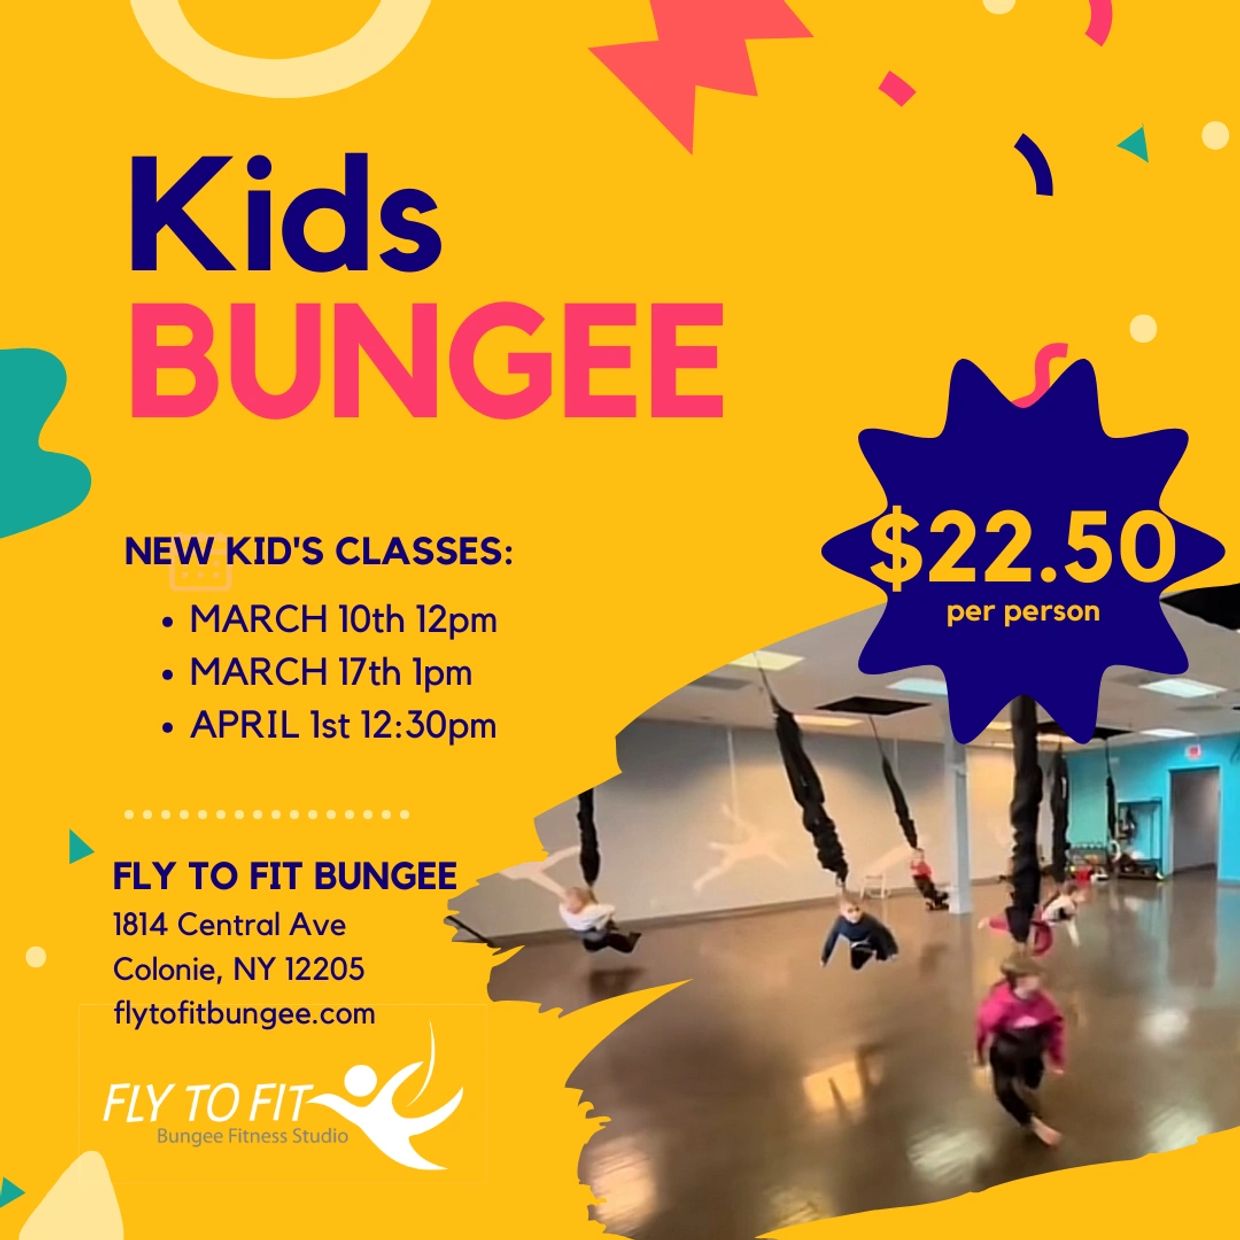 KIDS BUNGEE  Fly to Fit Bungee Fitness